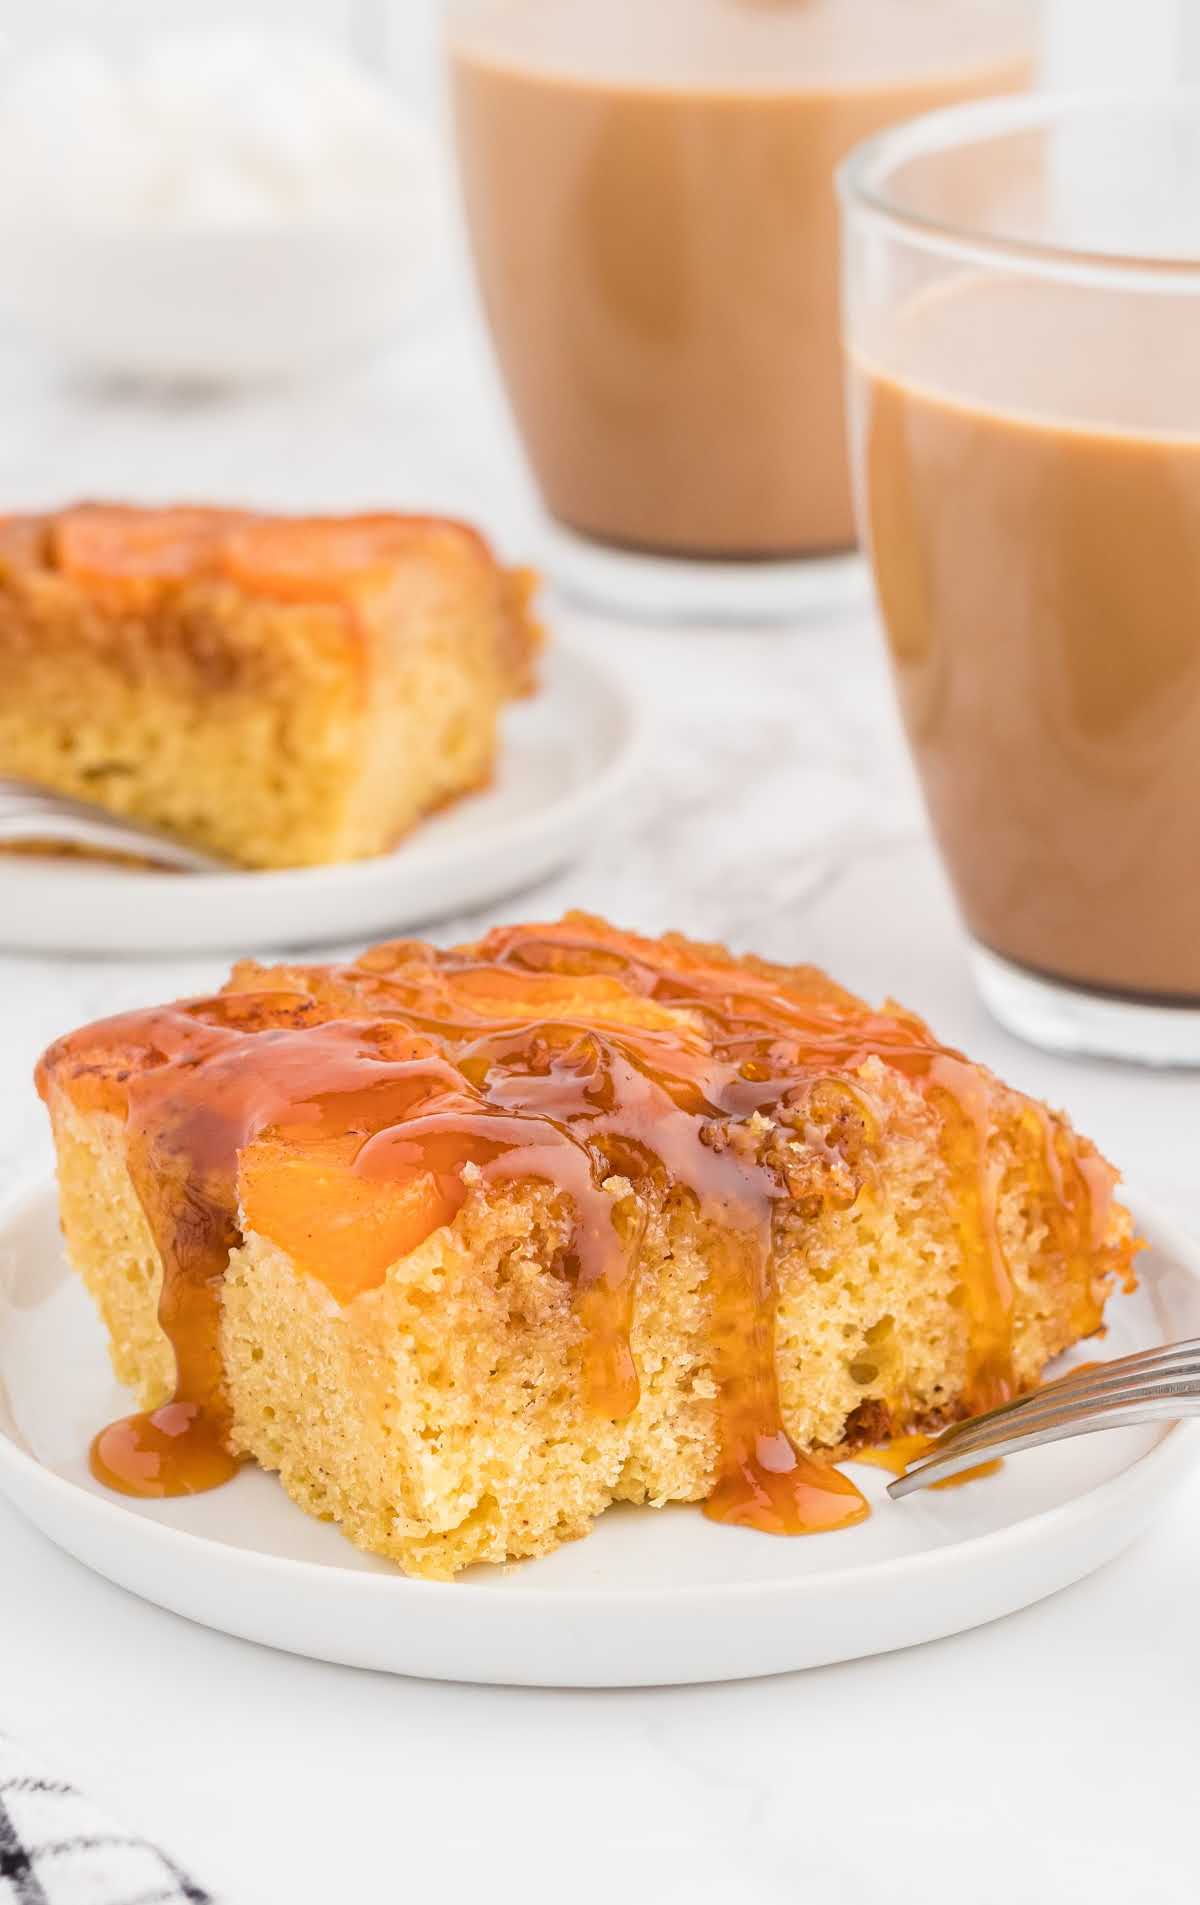 A slice of cake on a plate next to a cup of coffee, with Peach and side